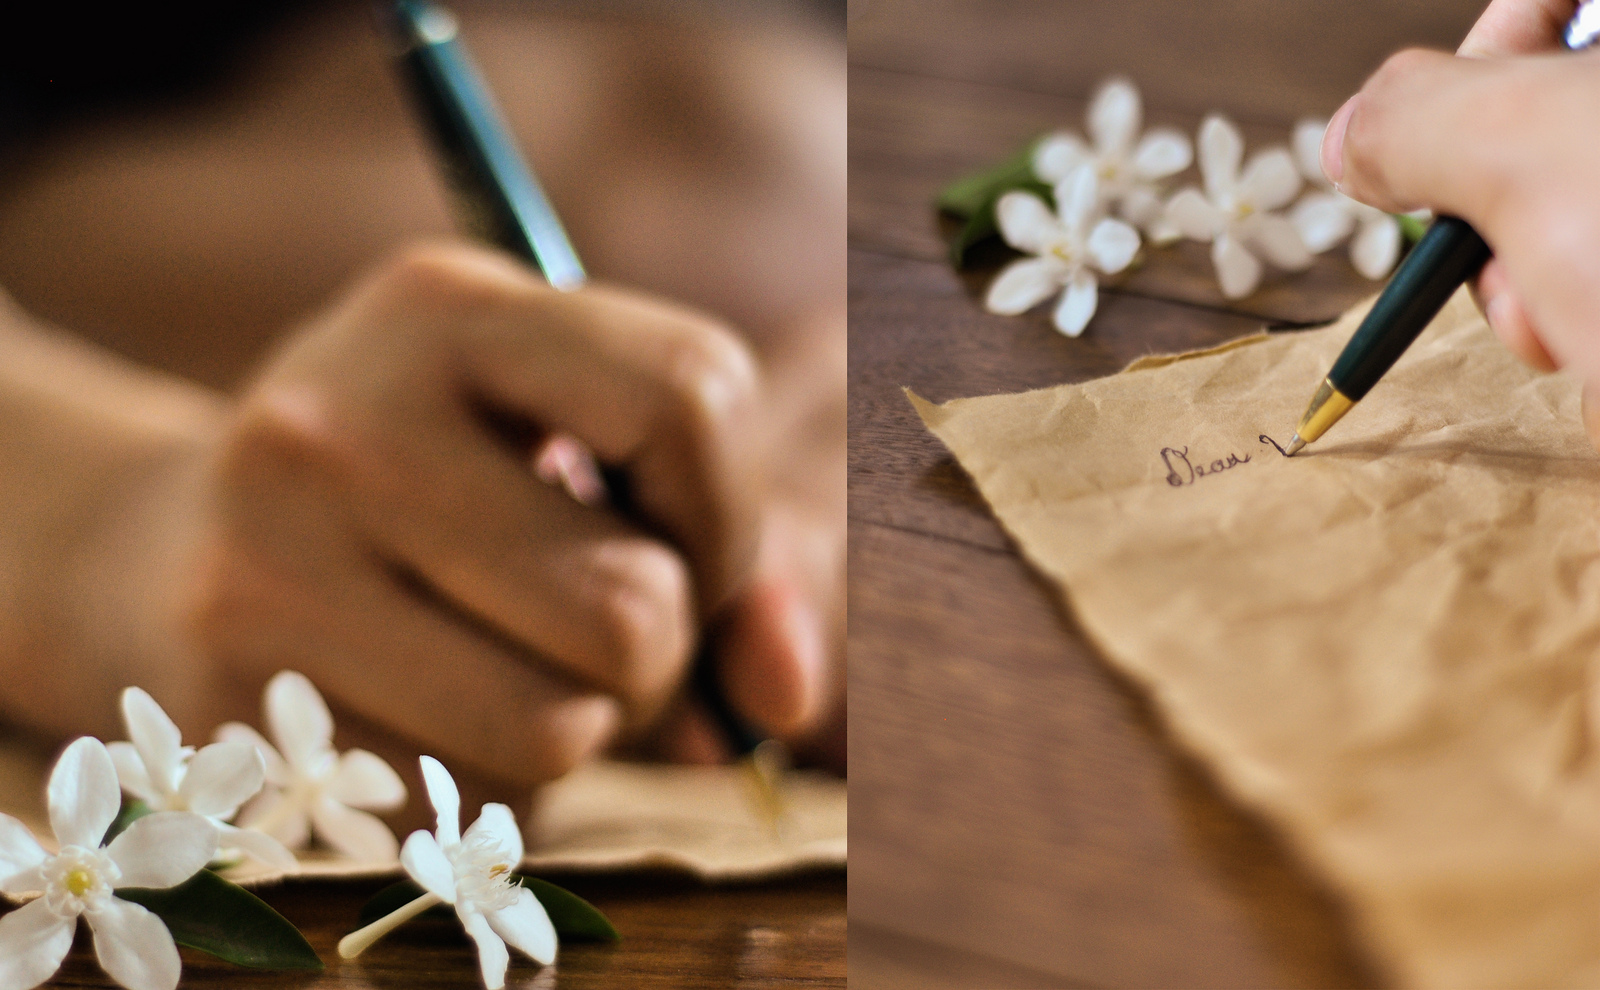 50 Things To Send To Your Pen Pal